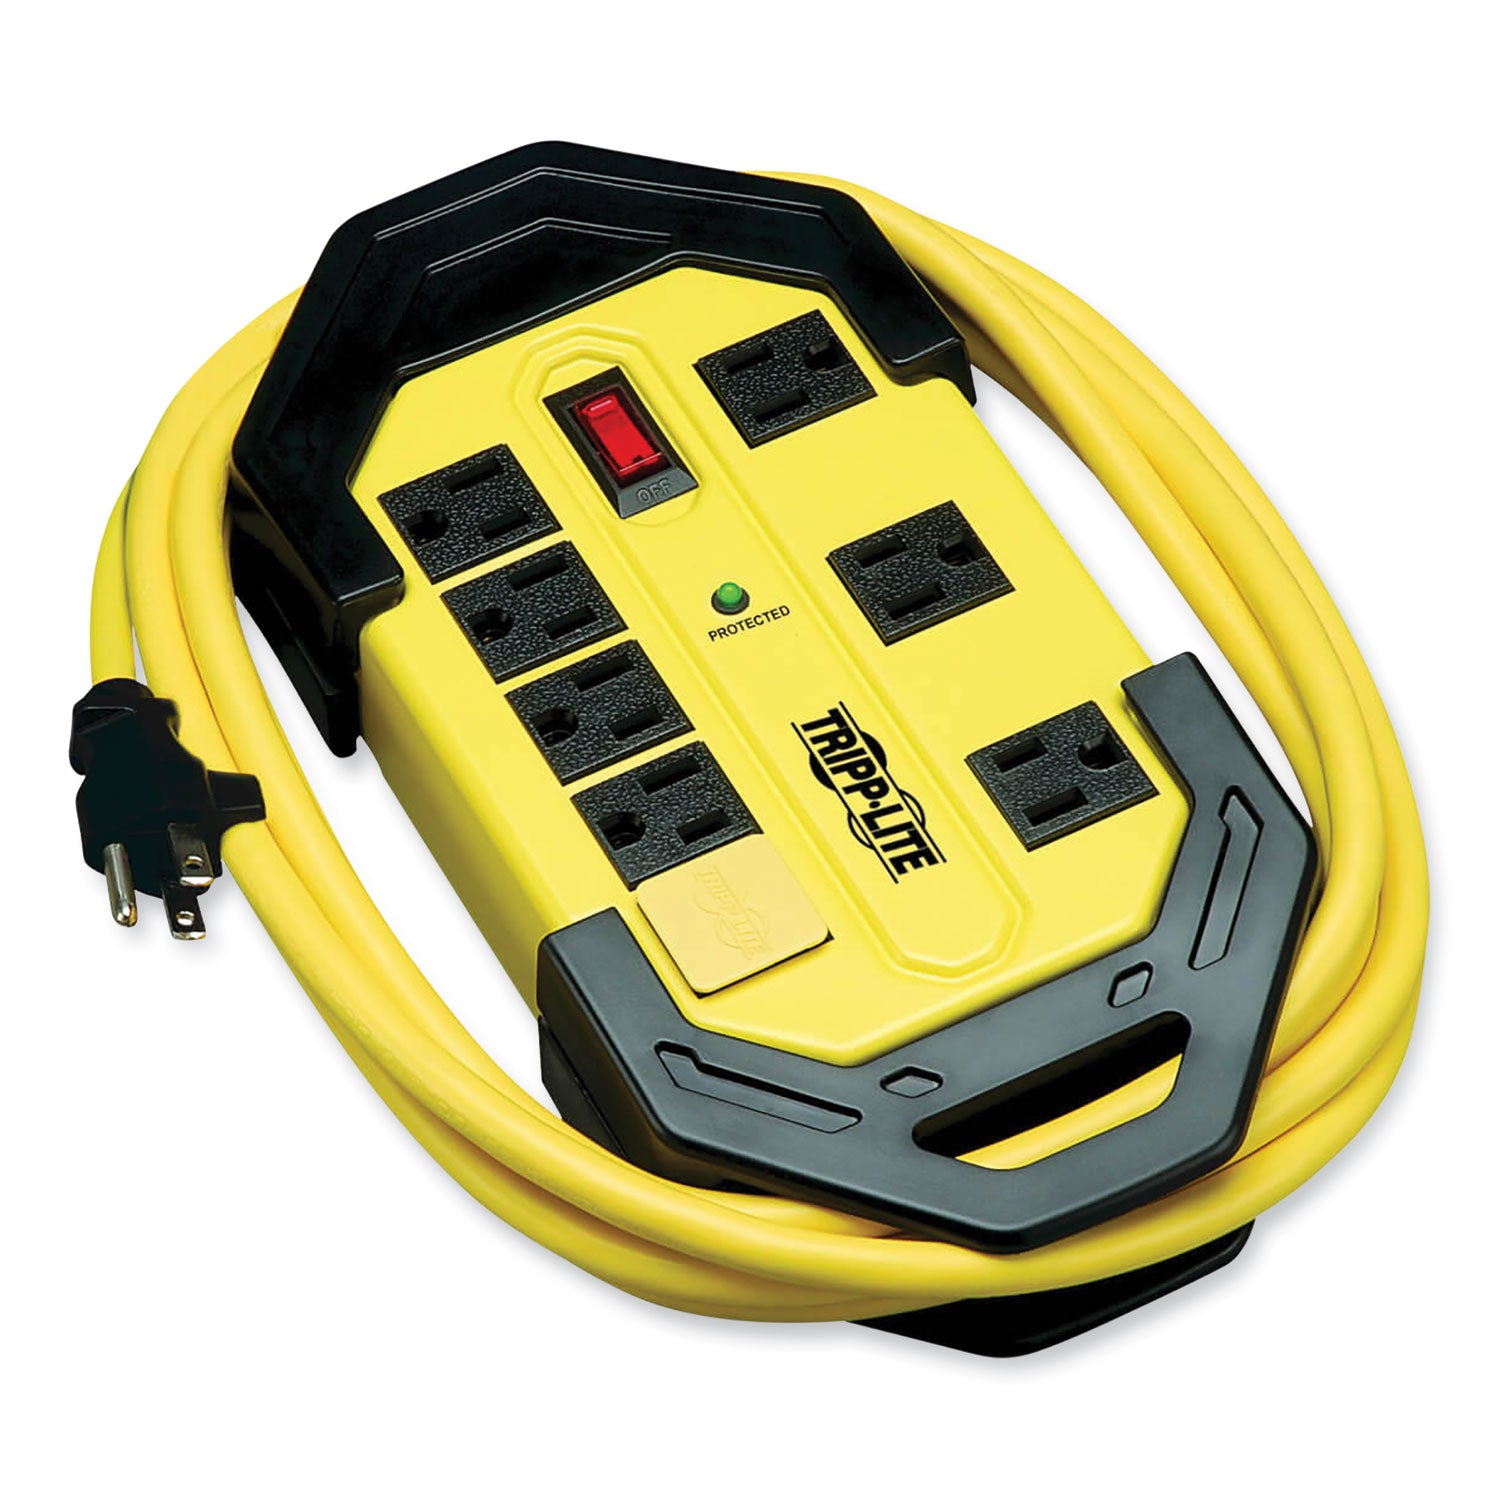 Protect It! Industrial Safety Surge Protector, 8 AC Outlets, 12 ft Cord, 1,500 J, Yellow/Black - 